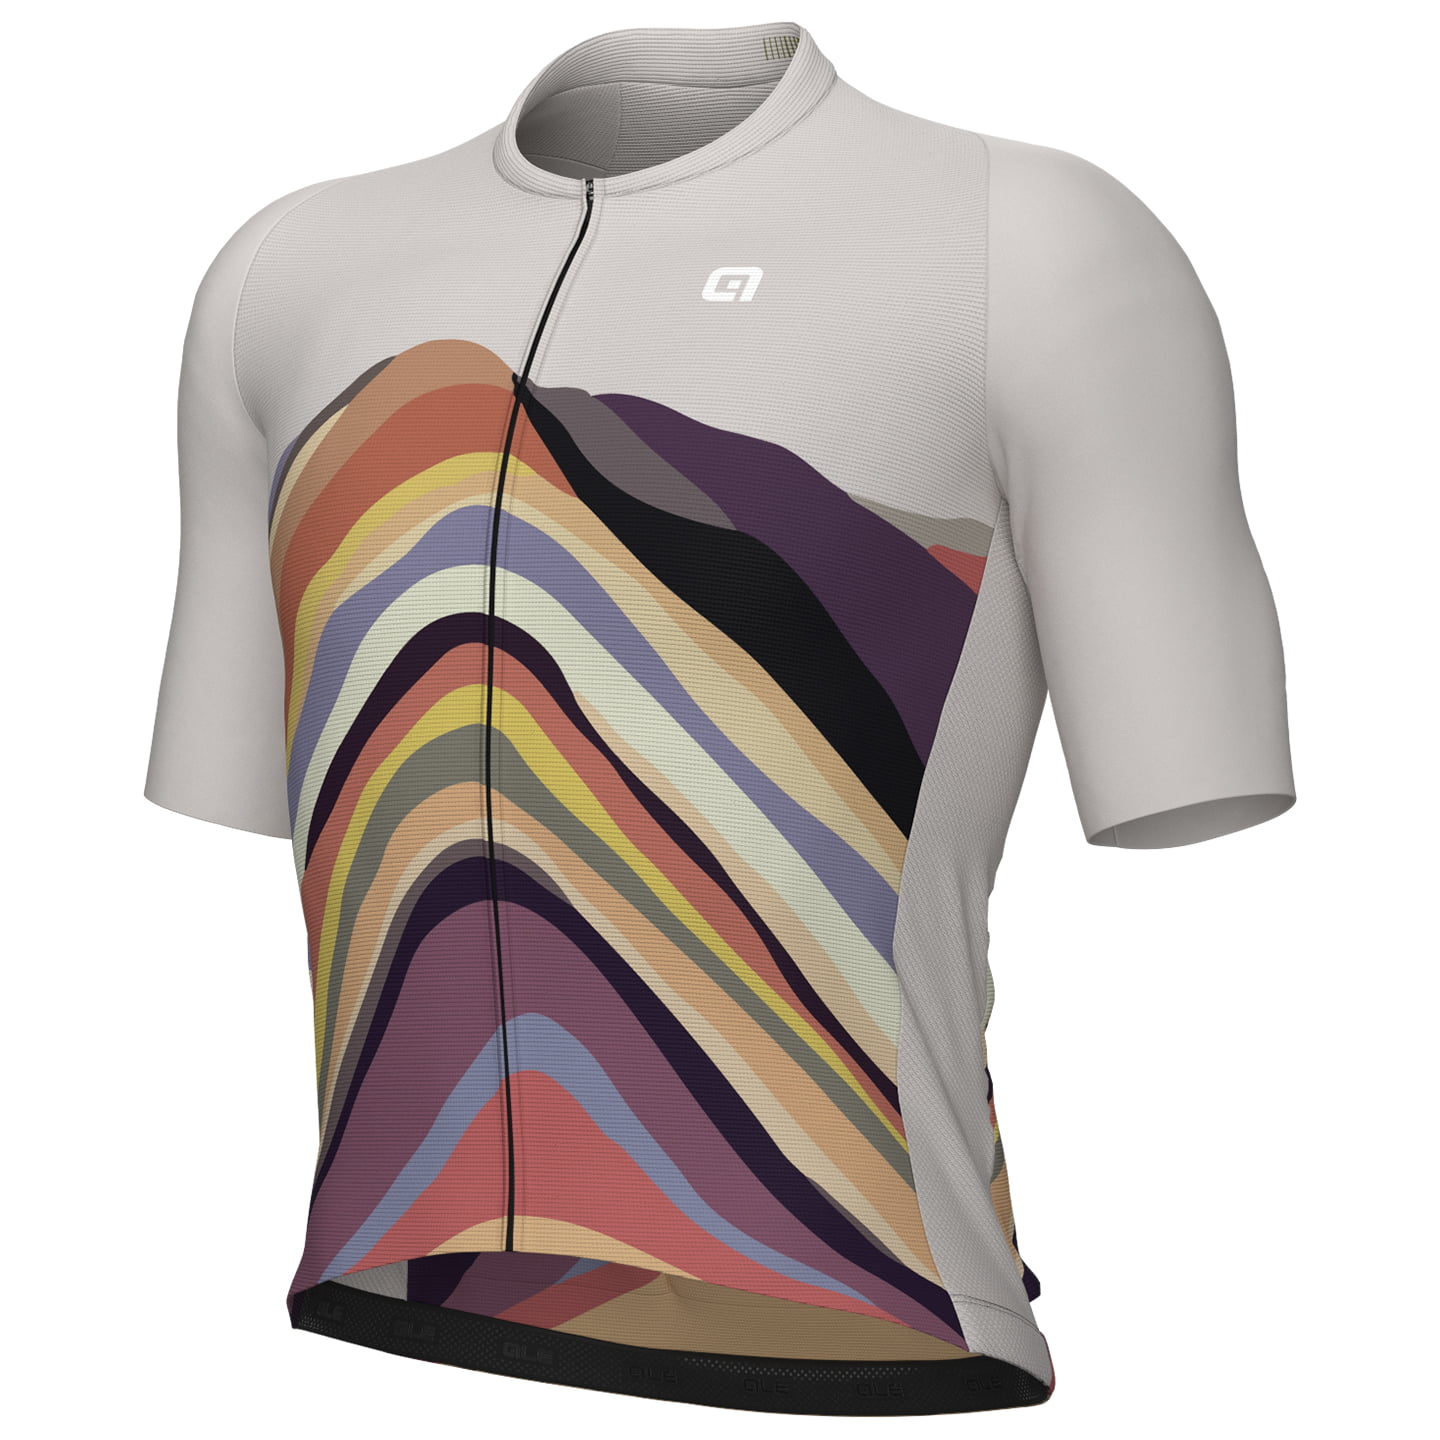 ALE Rainbow Short Sleeve Jersey, for men, size XL, Cycling jersey, Cycle clothing